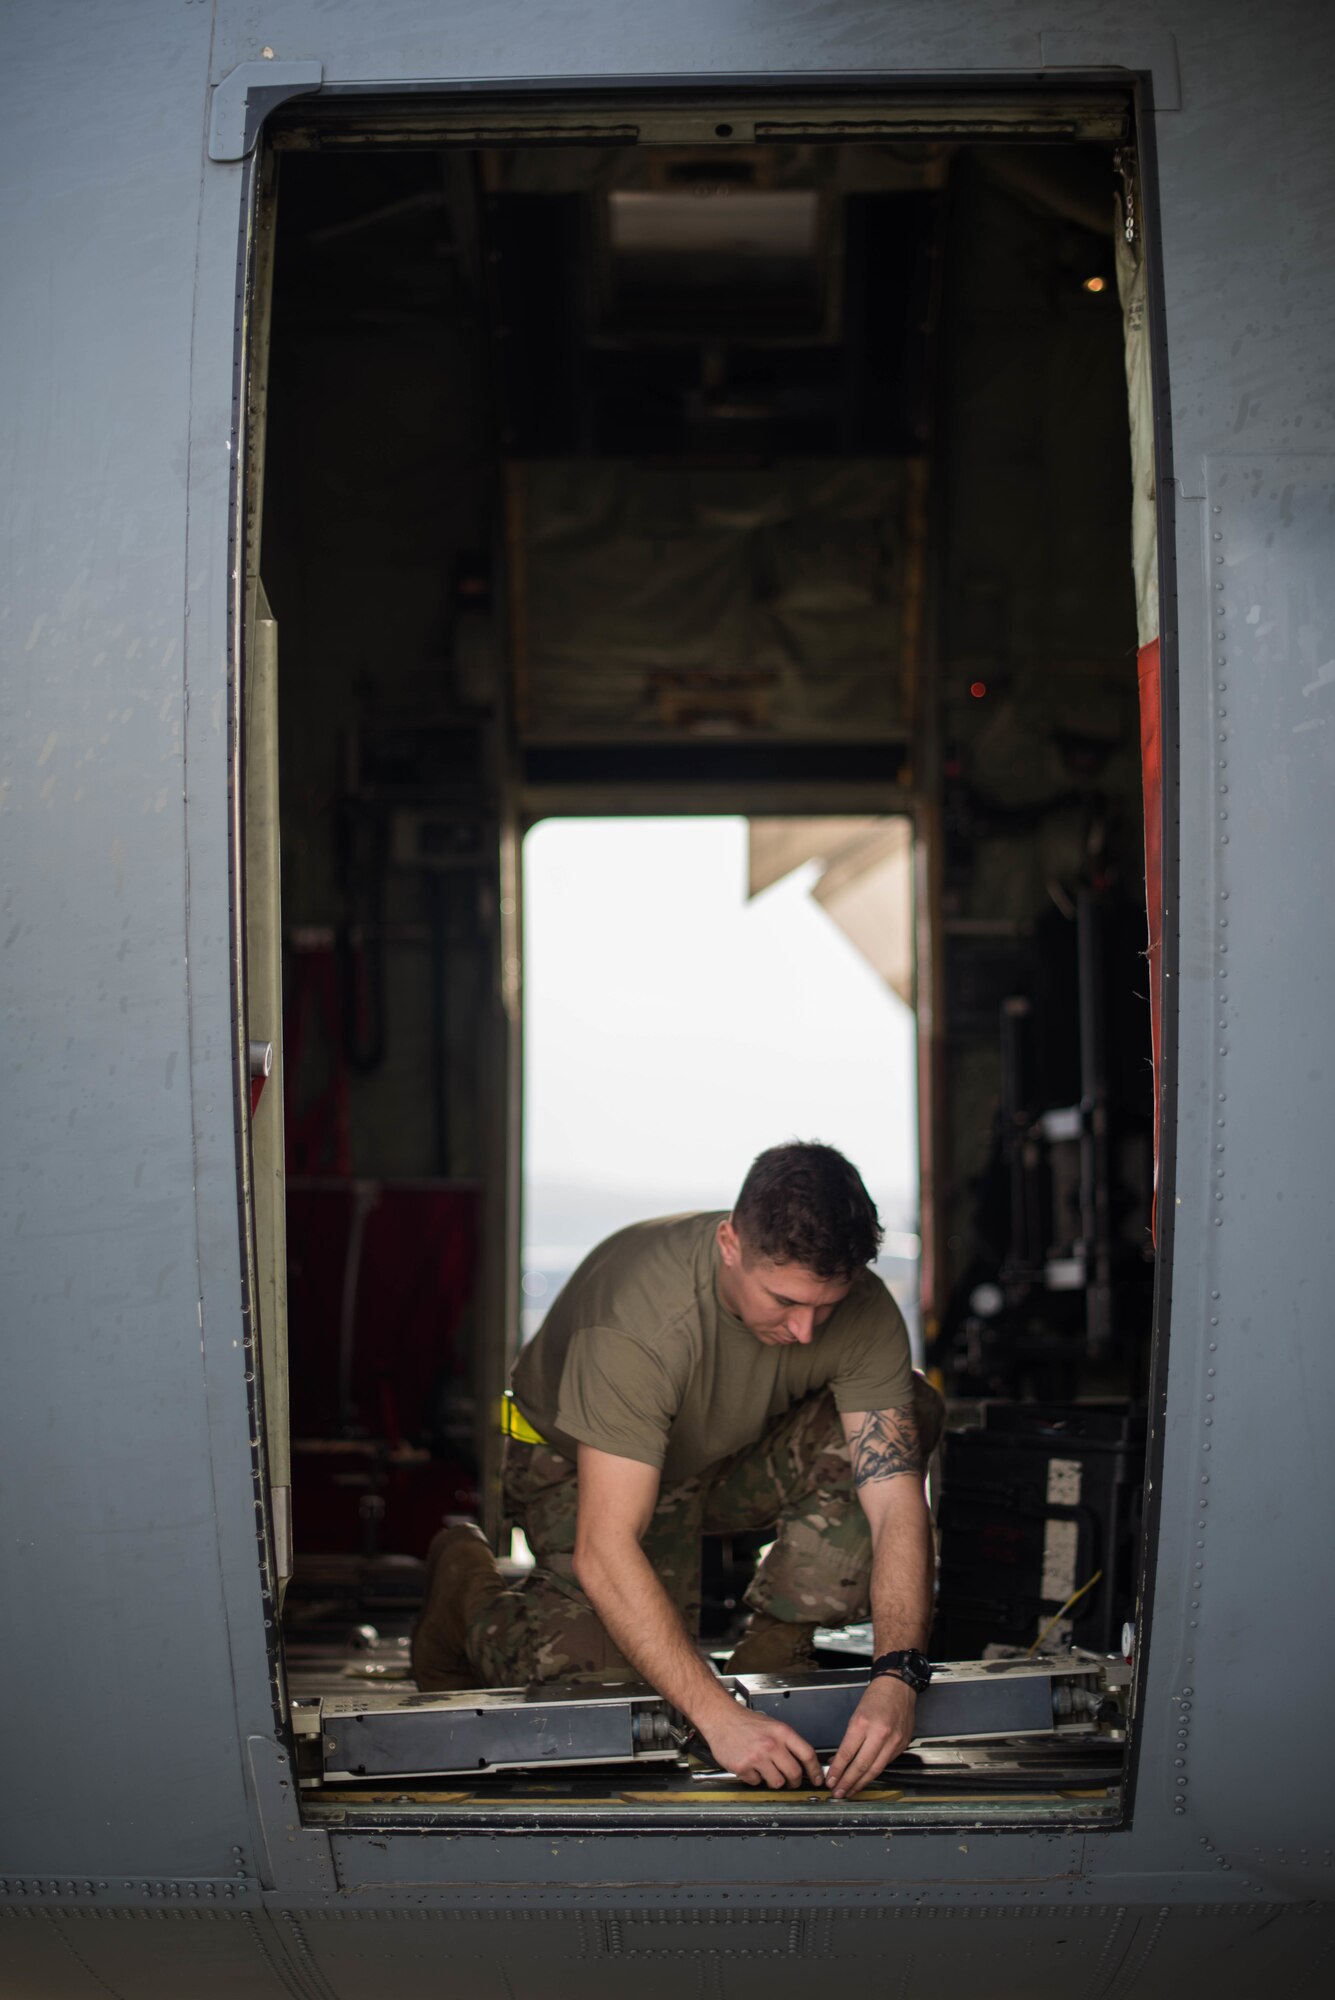 A U.S. Air Force Airman assigned to the 37th Airlift Squadron conducts maintenance on a C-130J Super Hercules aircraft during Exercise Agile Wolf at Ramstein Air Base, Germany, Dec. 17, 2019. A C-130J can carry 90 troops, or 40,000 pounds of cargo and provides U.S. Air Forces in Europe's only professional airlift to any country, any time in the European theater. (U.S. Air Force photo by Staff Sgt. Devin Nothstine)